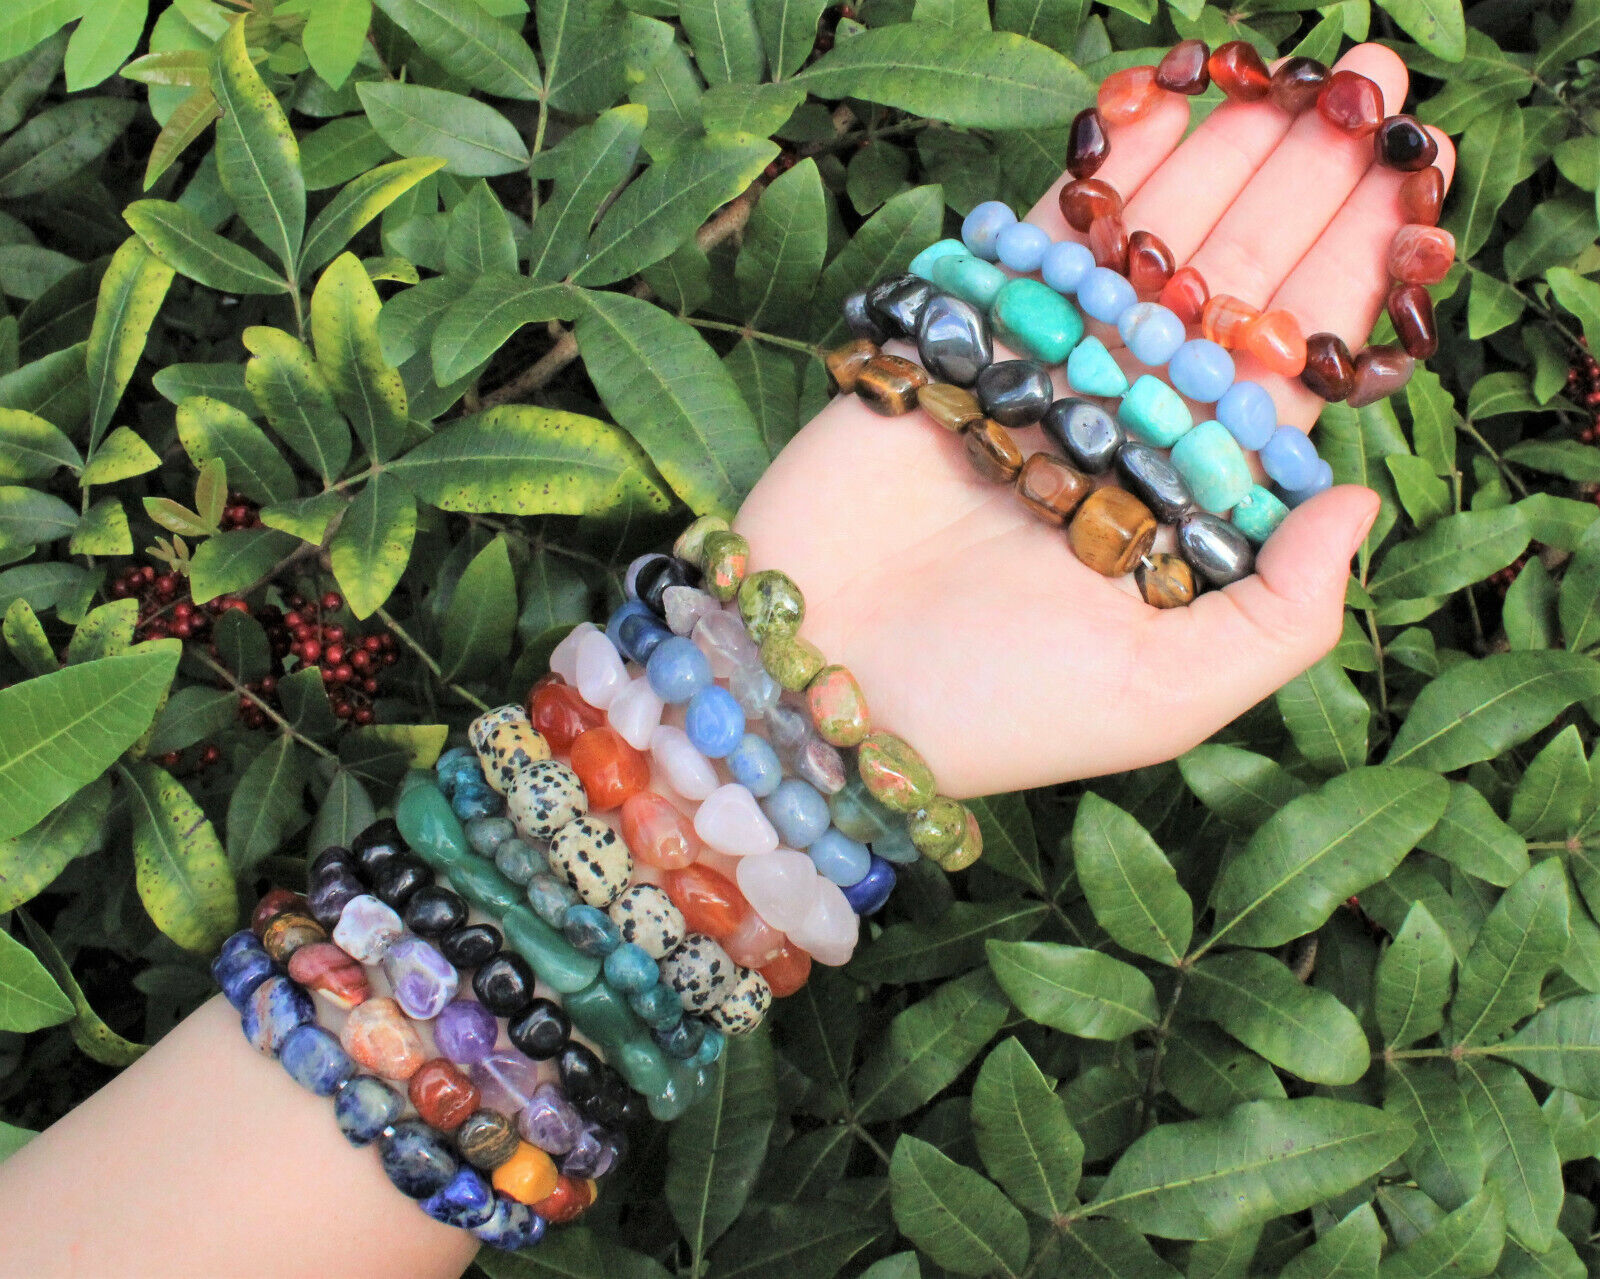 Natural stone bracelets, also known as gemstone bracelets or crystal bracelets, are a popular type of jewelry that features beads